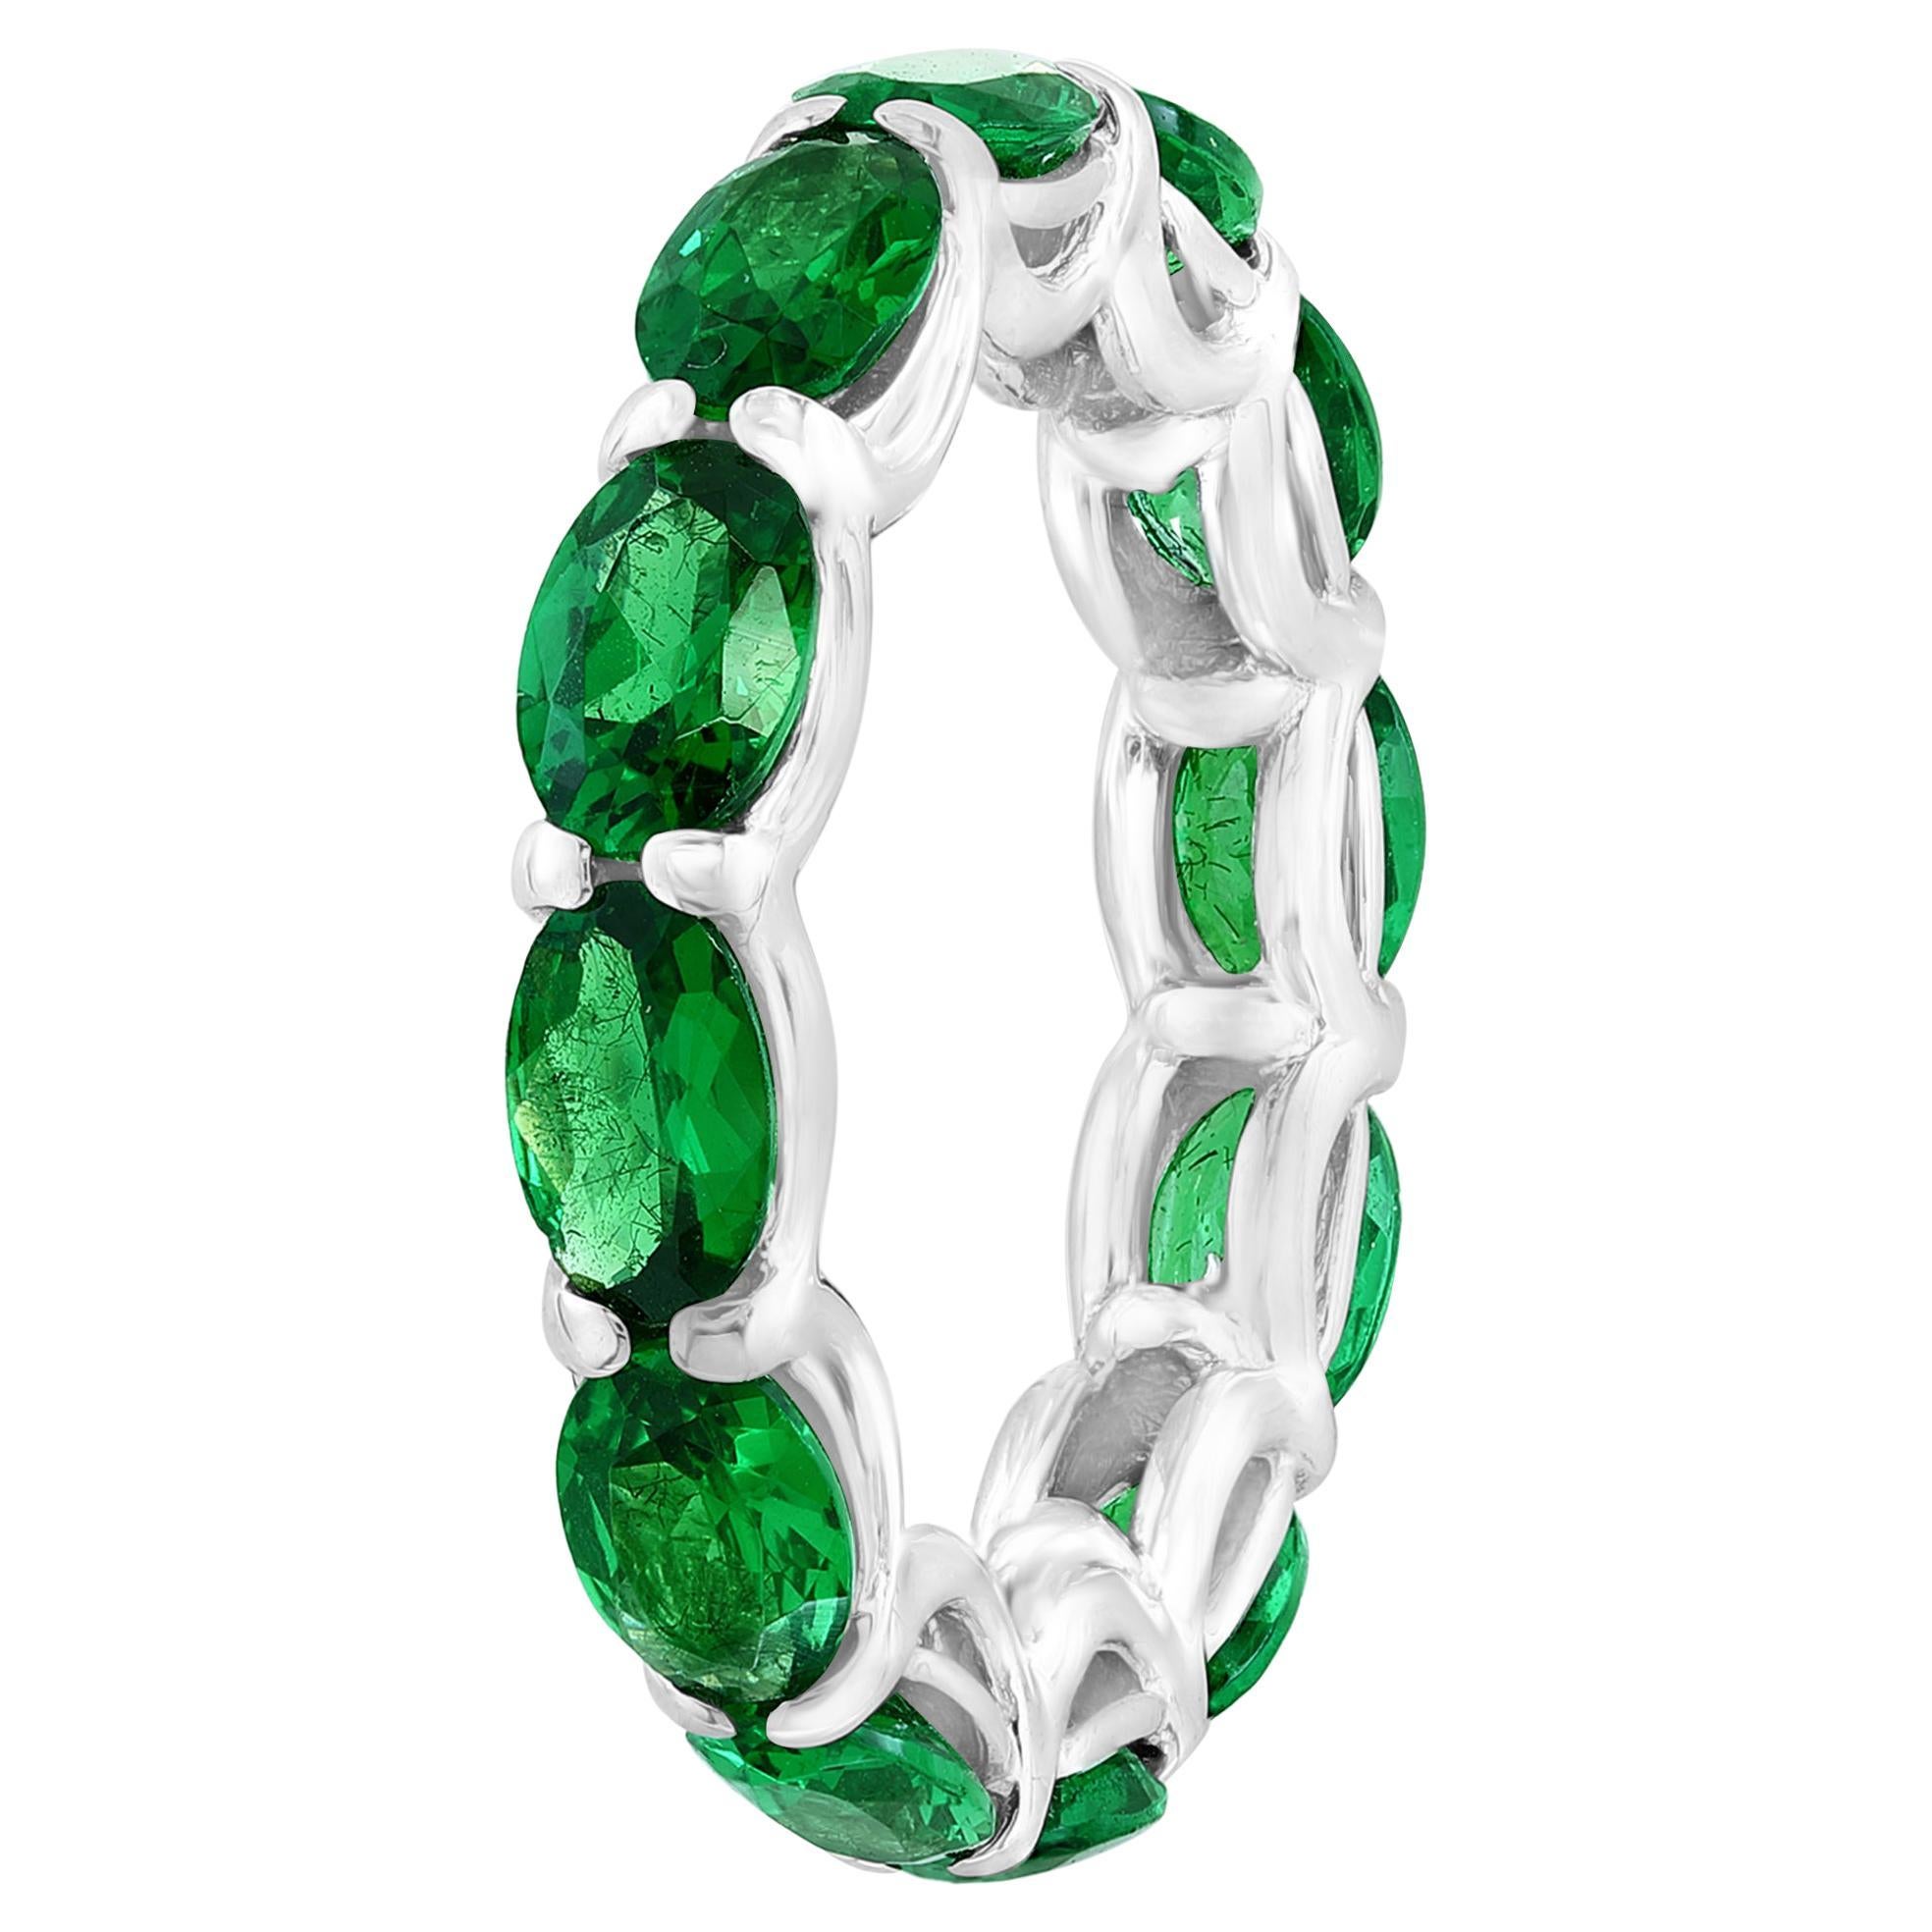 Auction - 5.22 Carat Oval Shaped Tsavorite Eternity Band Ring For Sale